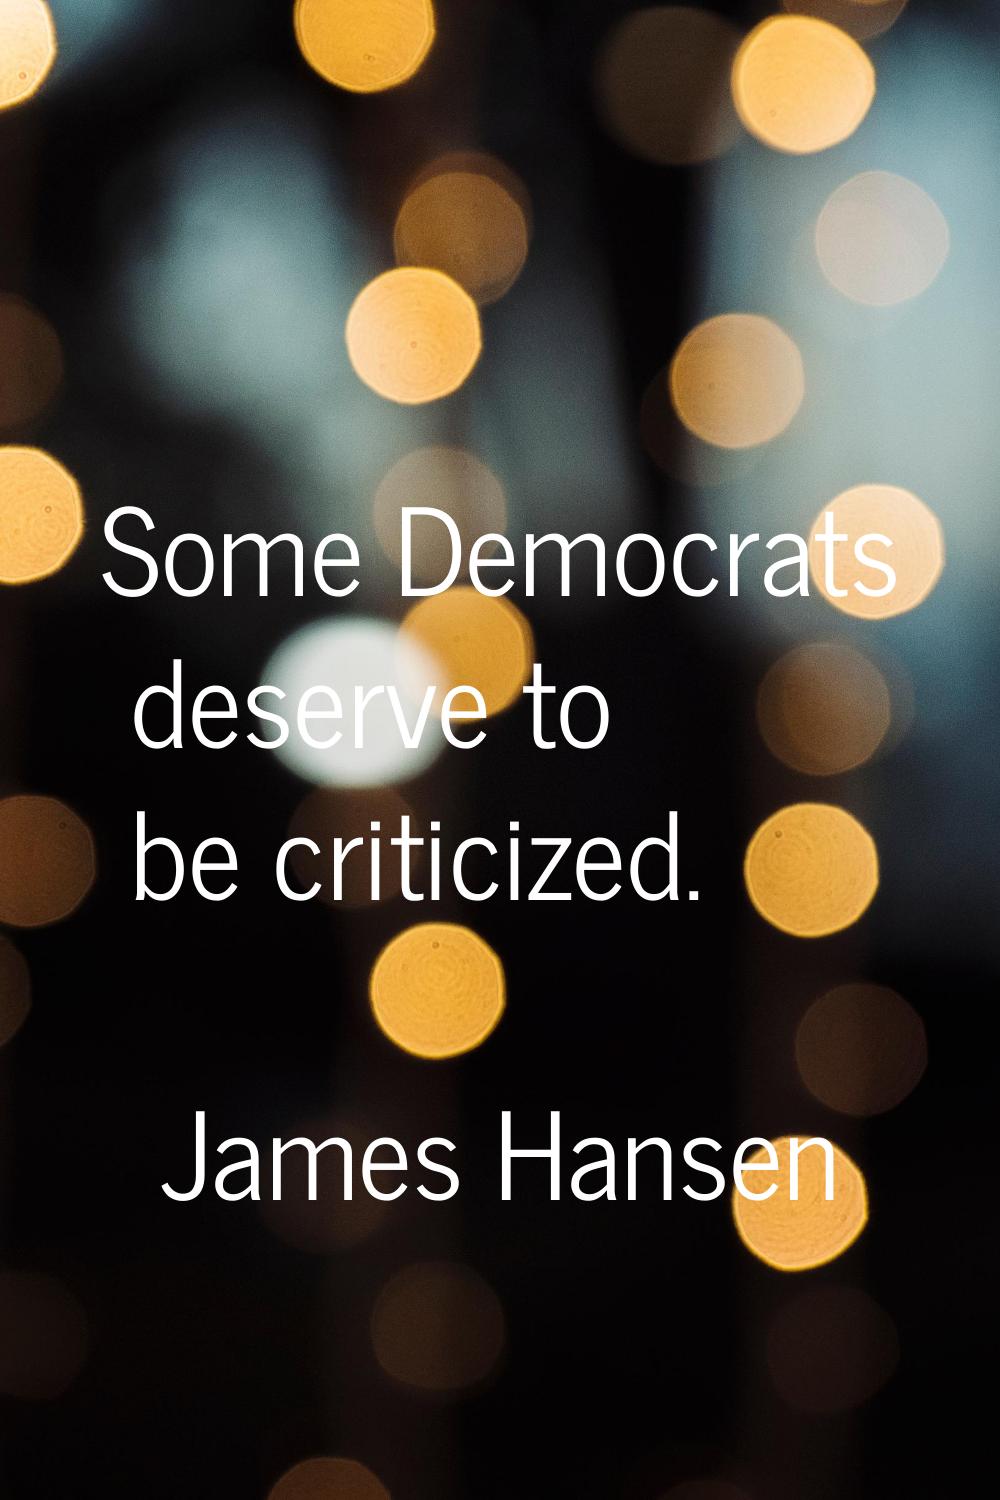 Some Democrats deserve to be criticized.